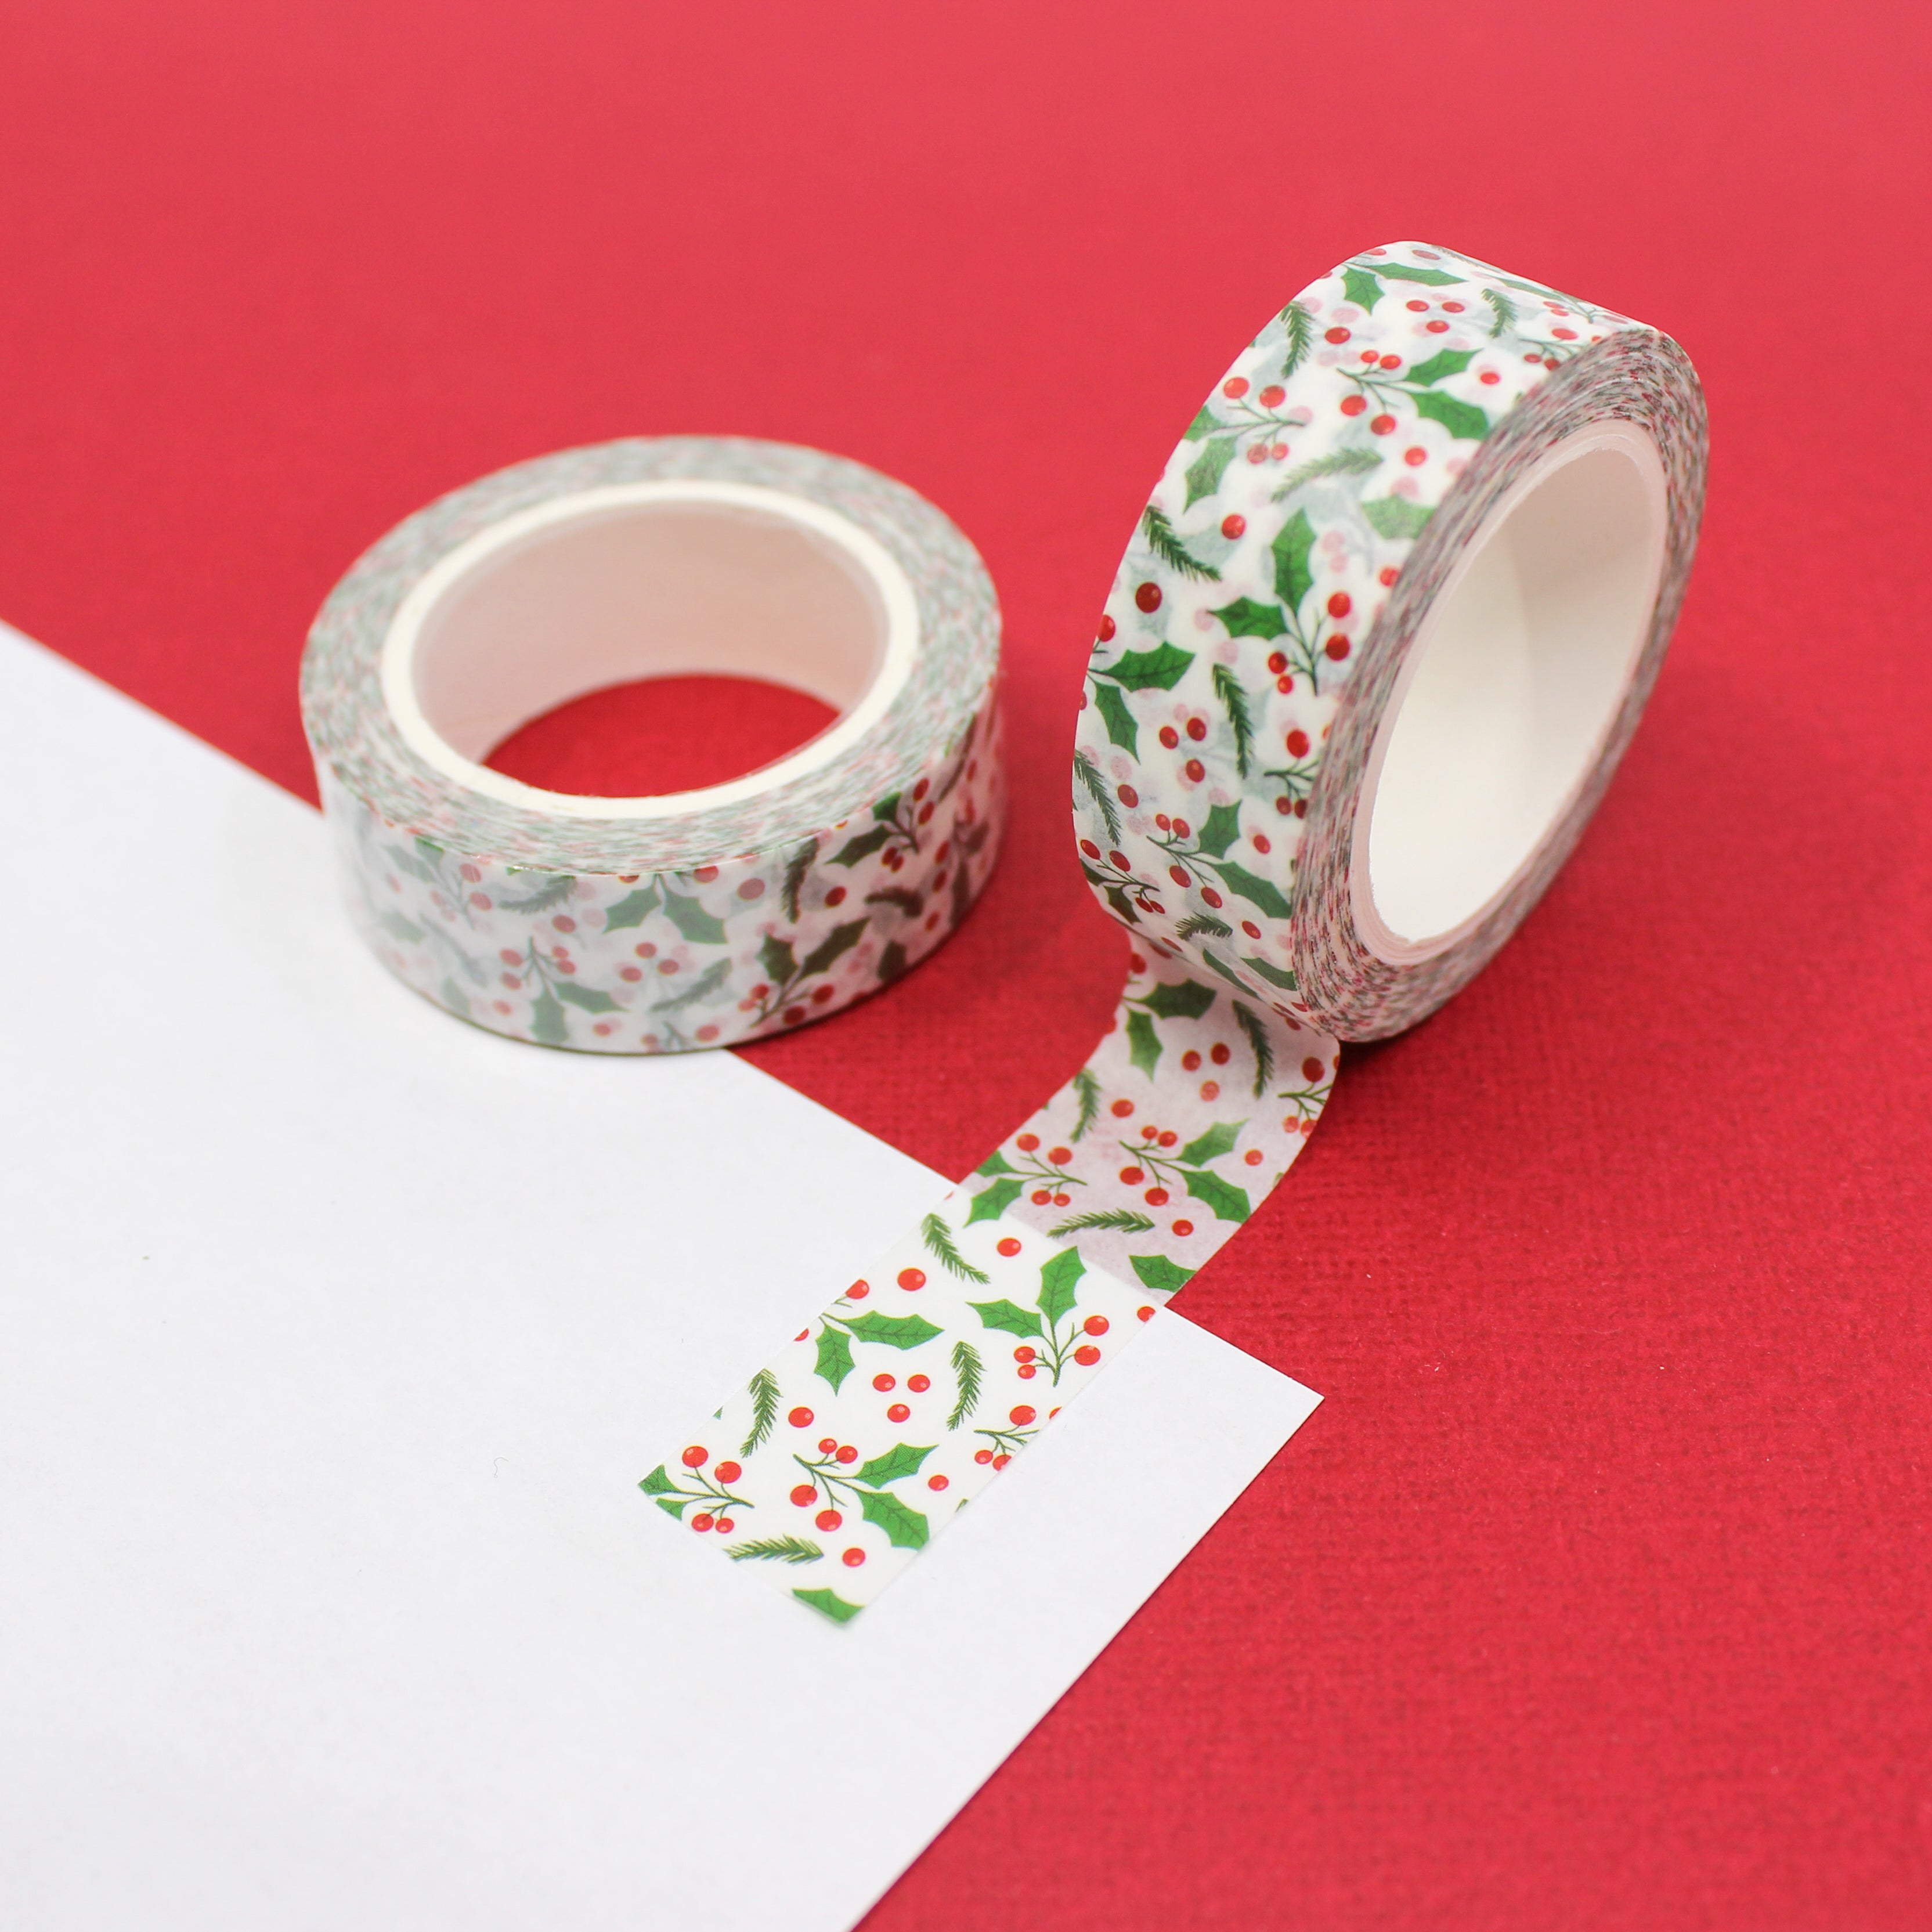 Cute little holiday Holly and red berries washi tape from BBB Supplies Craft Shop.